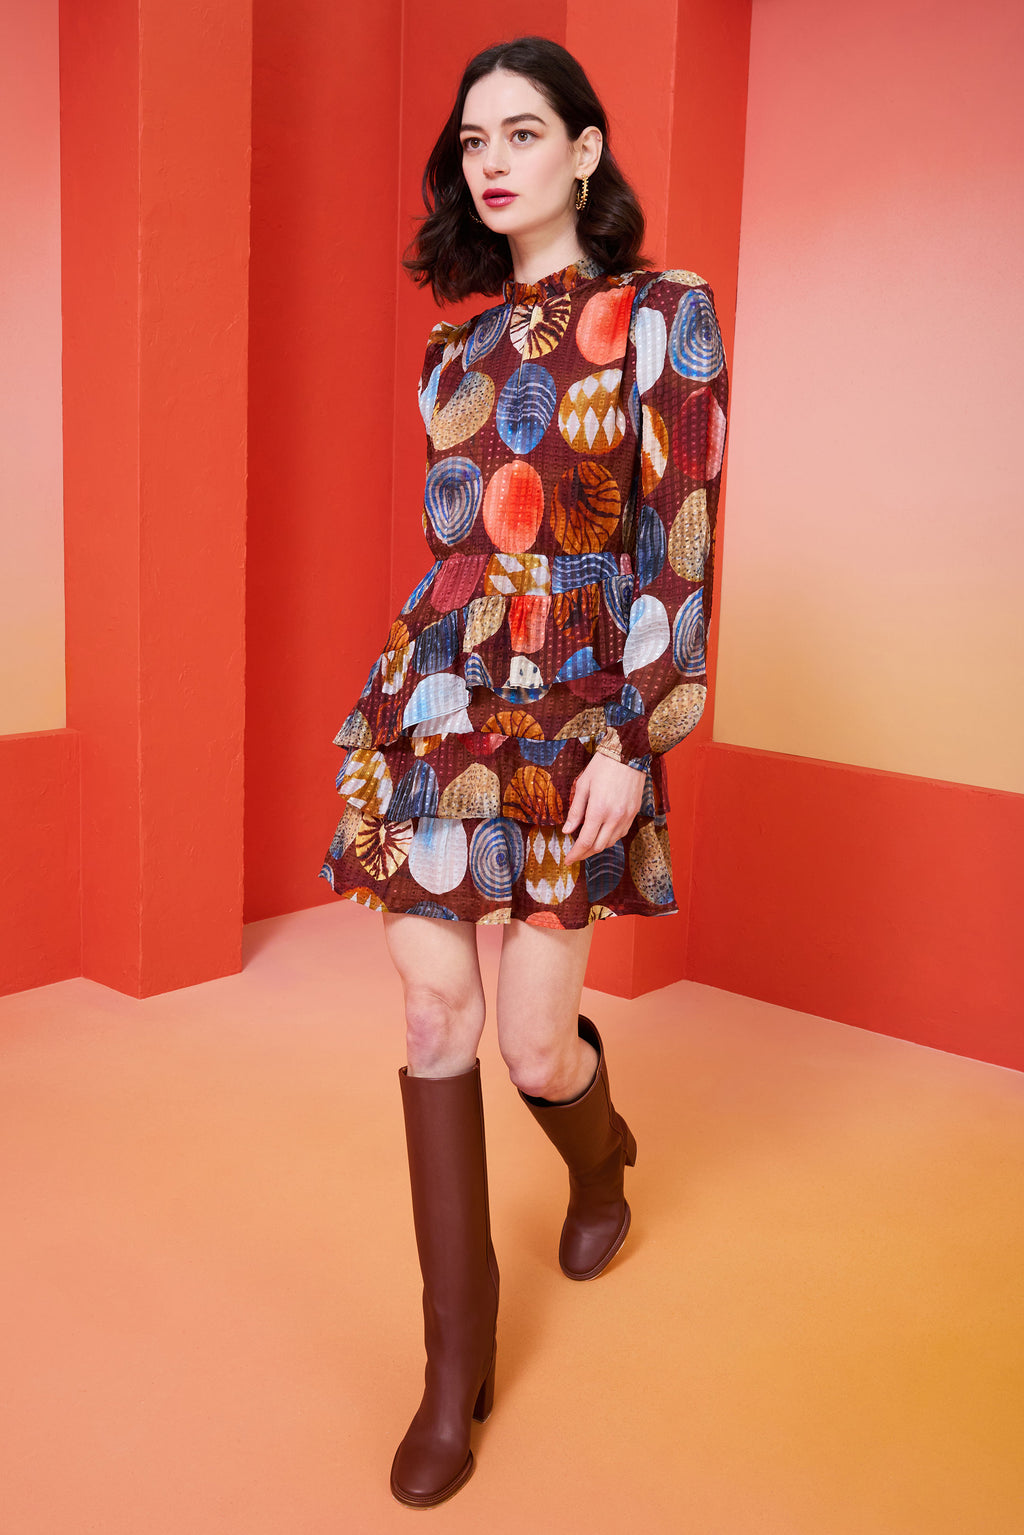 Long sleeve multi-colored dress with v-neck, tiered skirt, and a ruffled collar